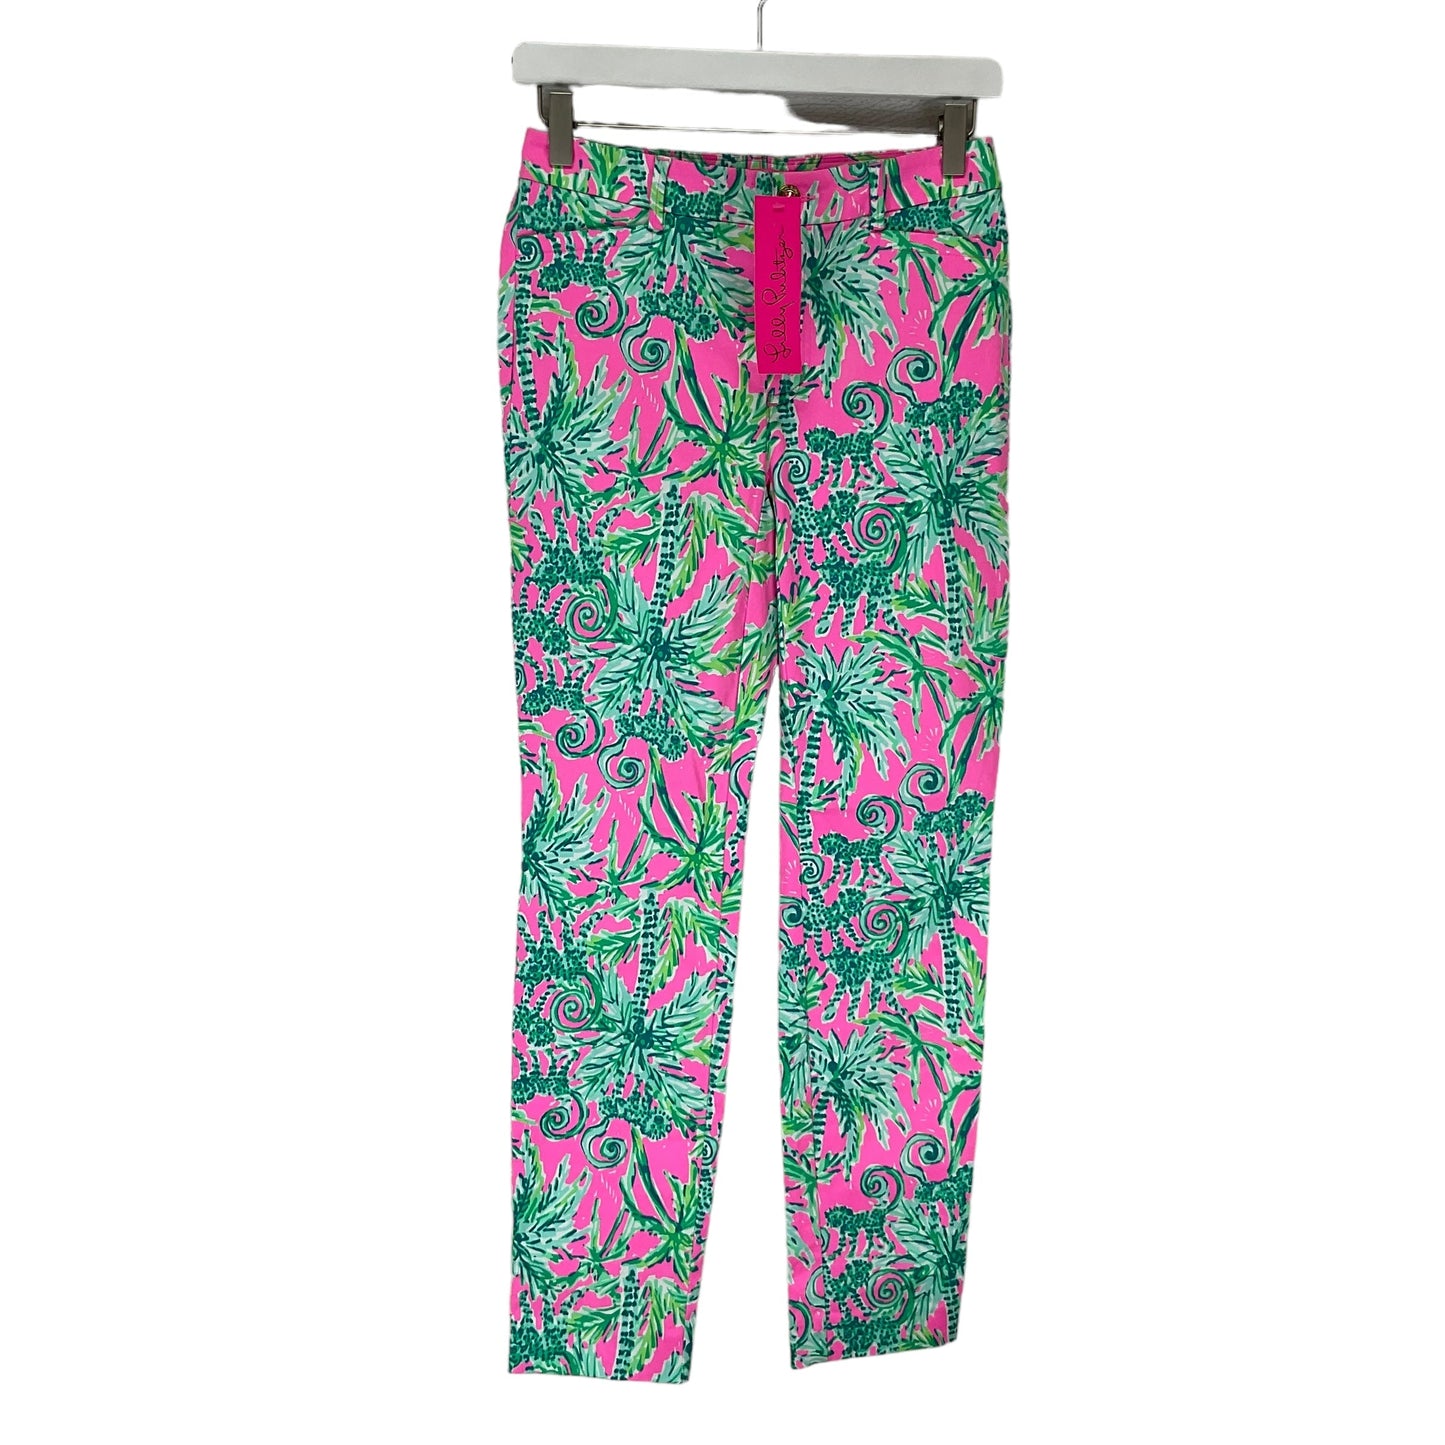 Green & Pink Pants Designer Lilly Pulitzer, Size 0